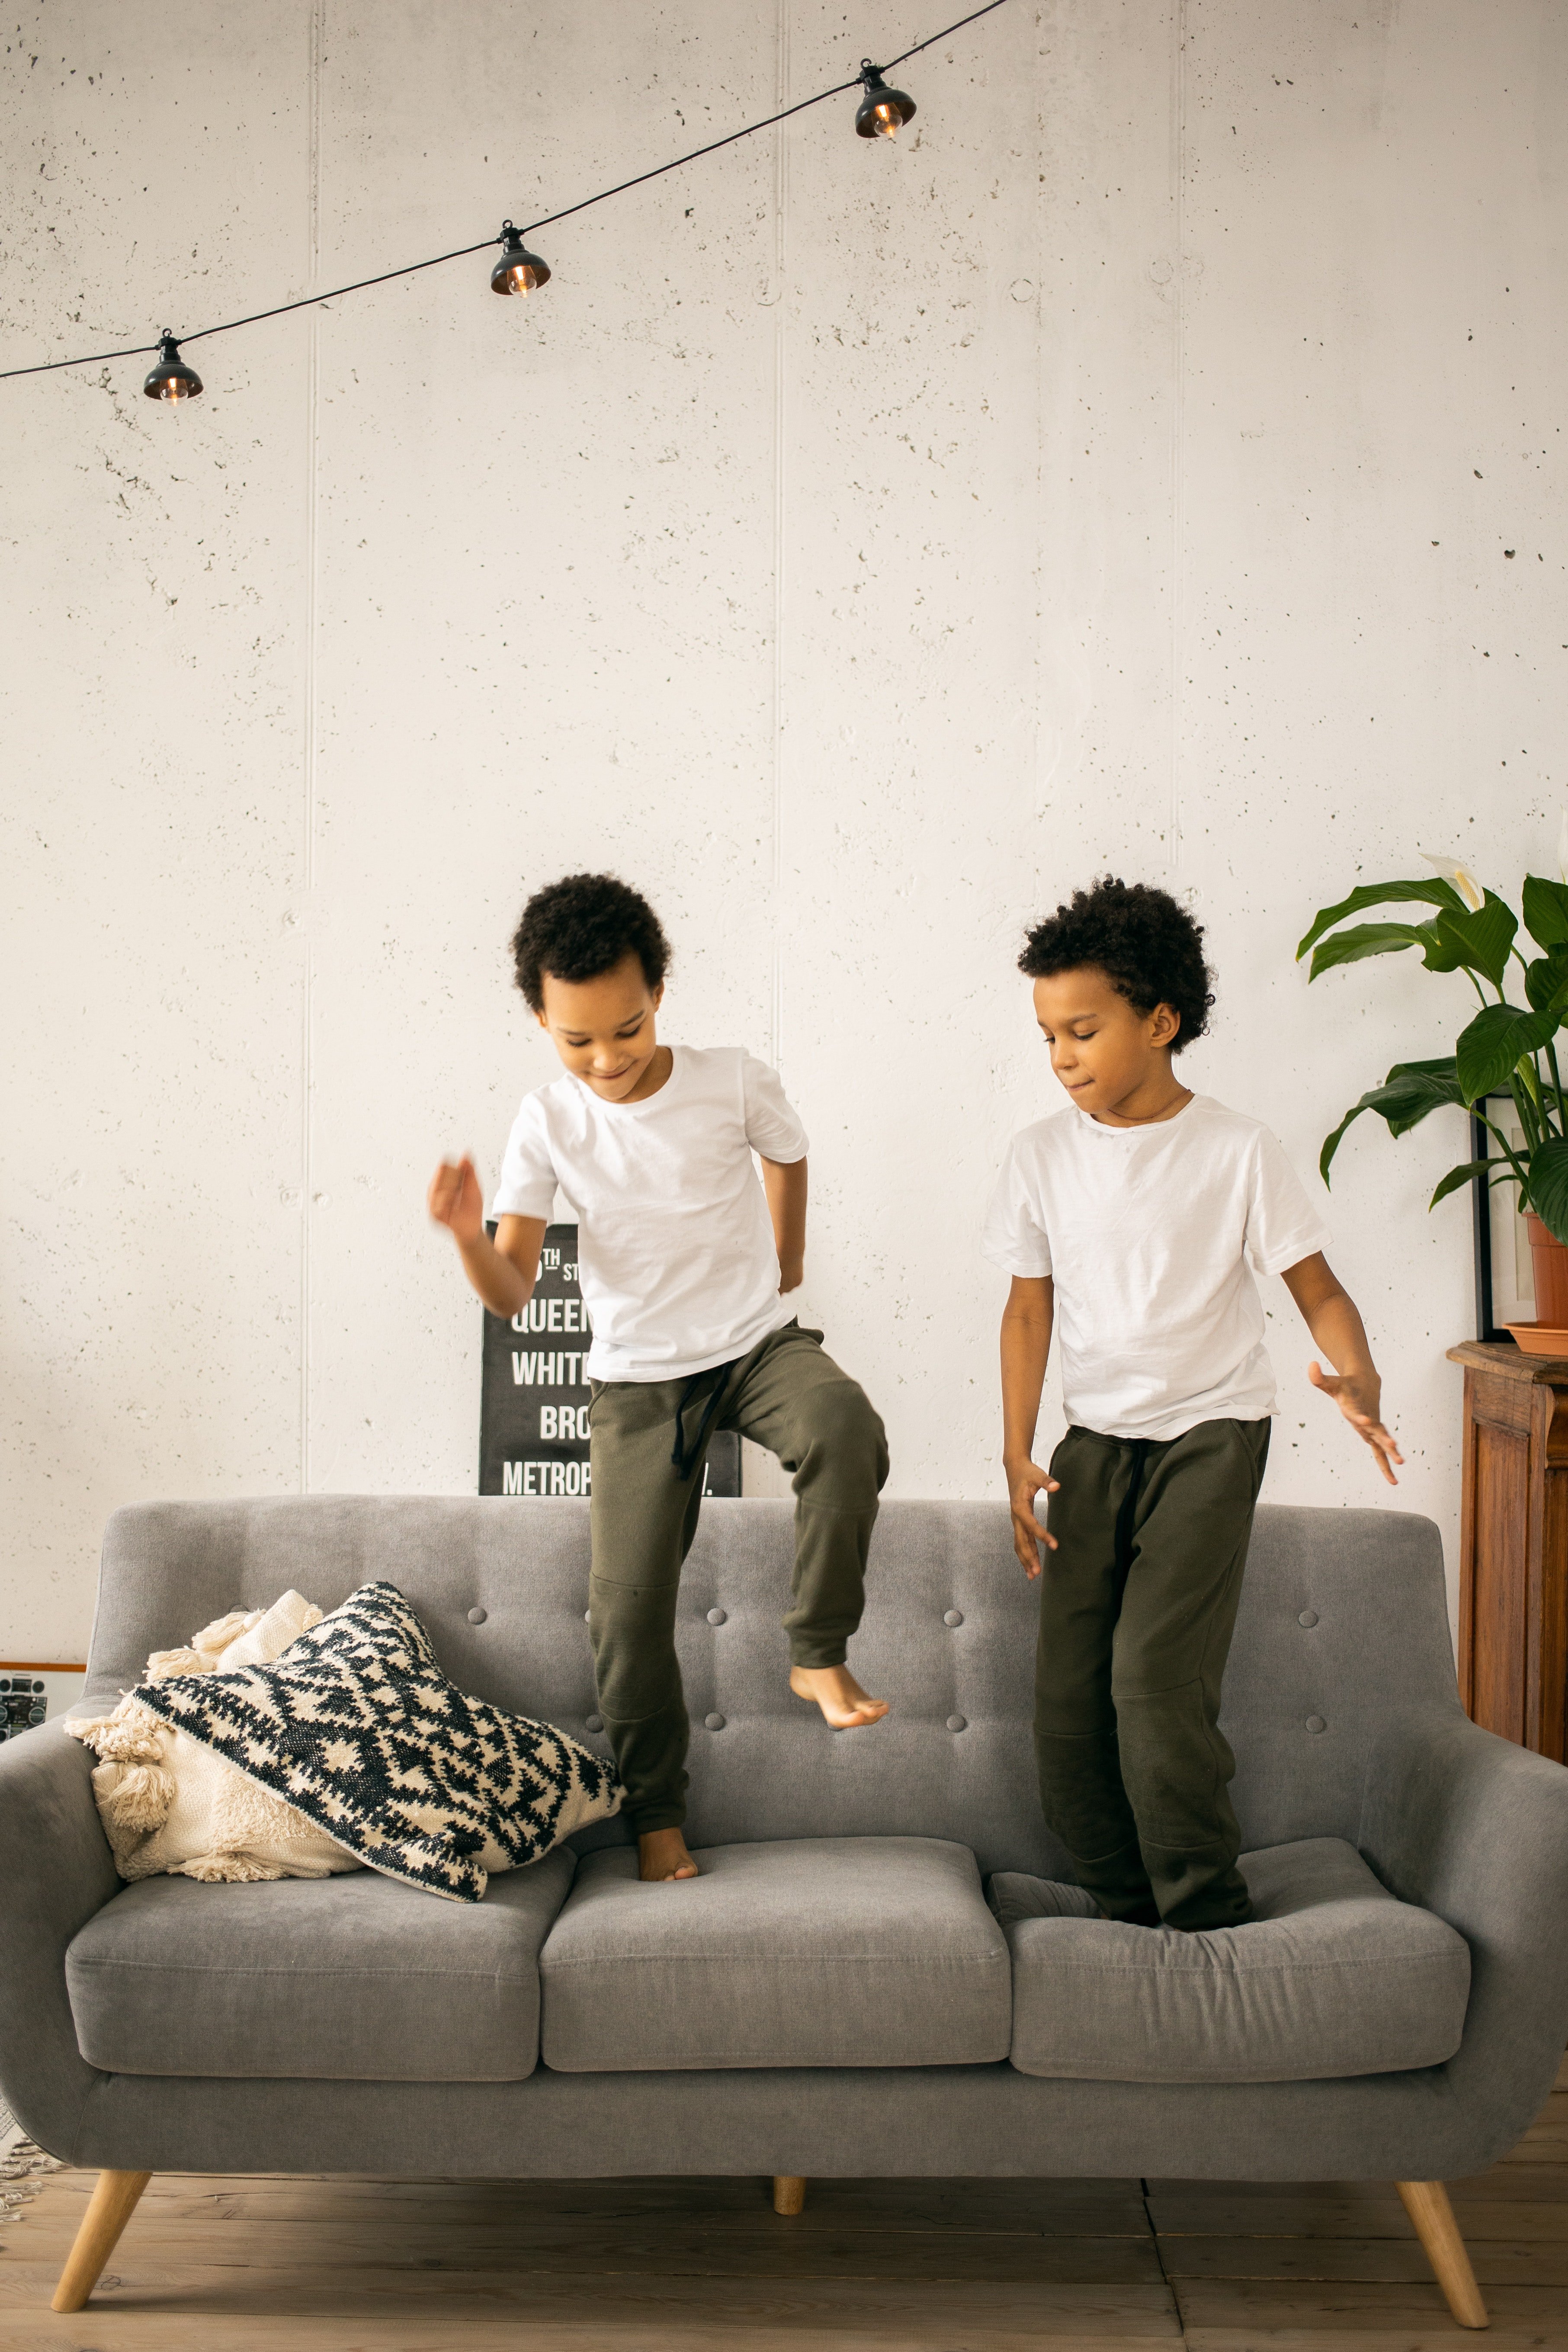 Identical twins jumping on the sofa | Photo: Pexels